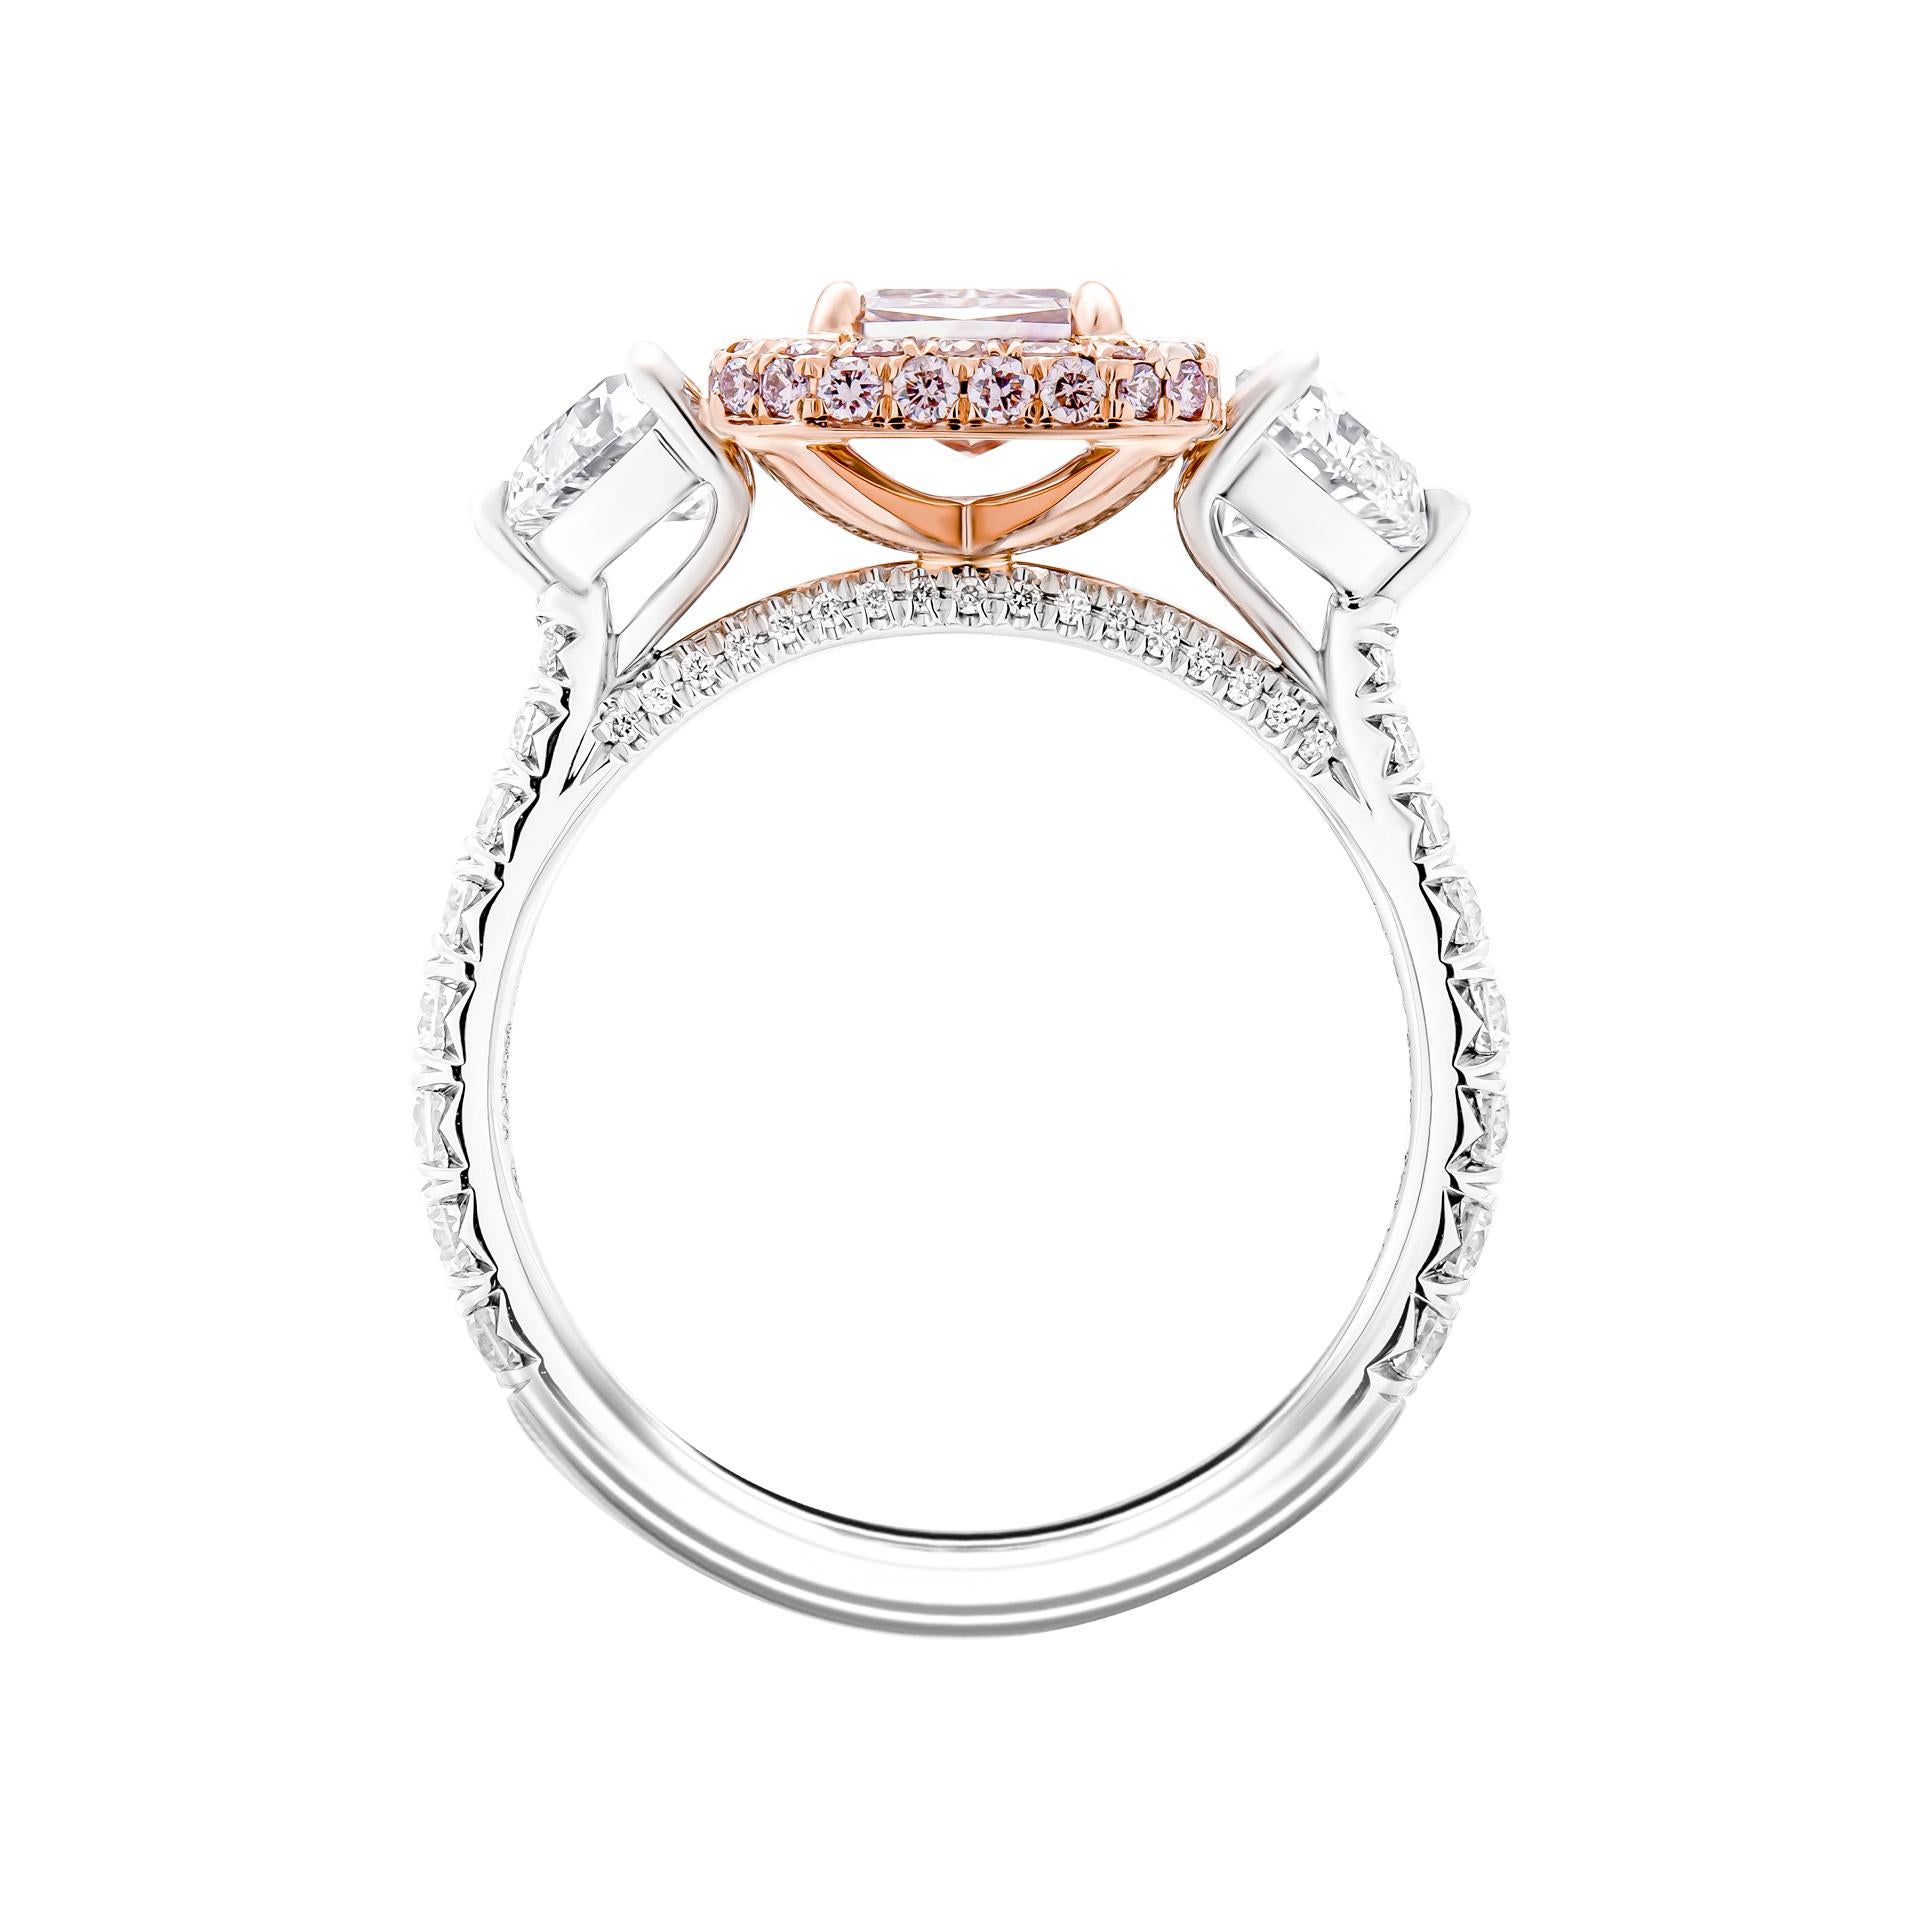 3 stone engagement ring in Platinum & 18K Rose Gold 
Center stone: 1.47ct Natural Fancy Brownish Pink VS2 Radiant Shape Diamond GIA#2225616451 
Side stones: 0.50ct F IF Heart Shape Diamond GIA#5222052674
                      0.53ct F IF Heart Shape